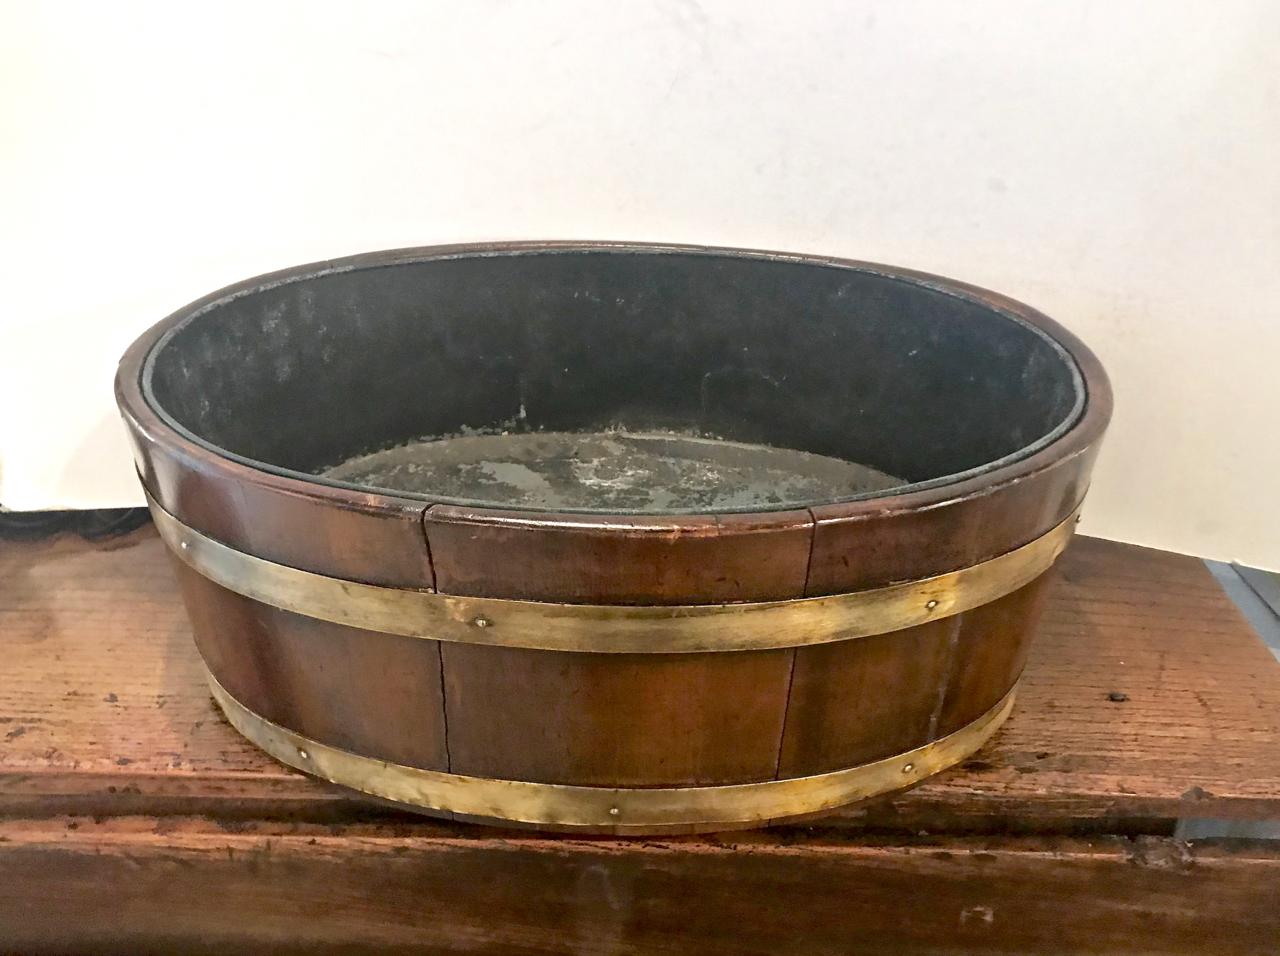 This is a very decorative late George III brass bound mahogany wine cooler. The wine cooler is in very good overall condition with minor old professional restorations and an old replaced liner.
The cooler would make a stunning planter or jardinière